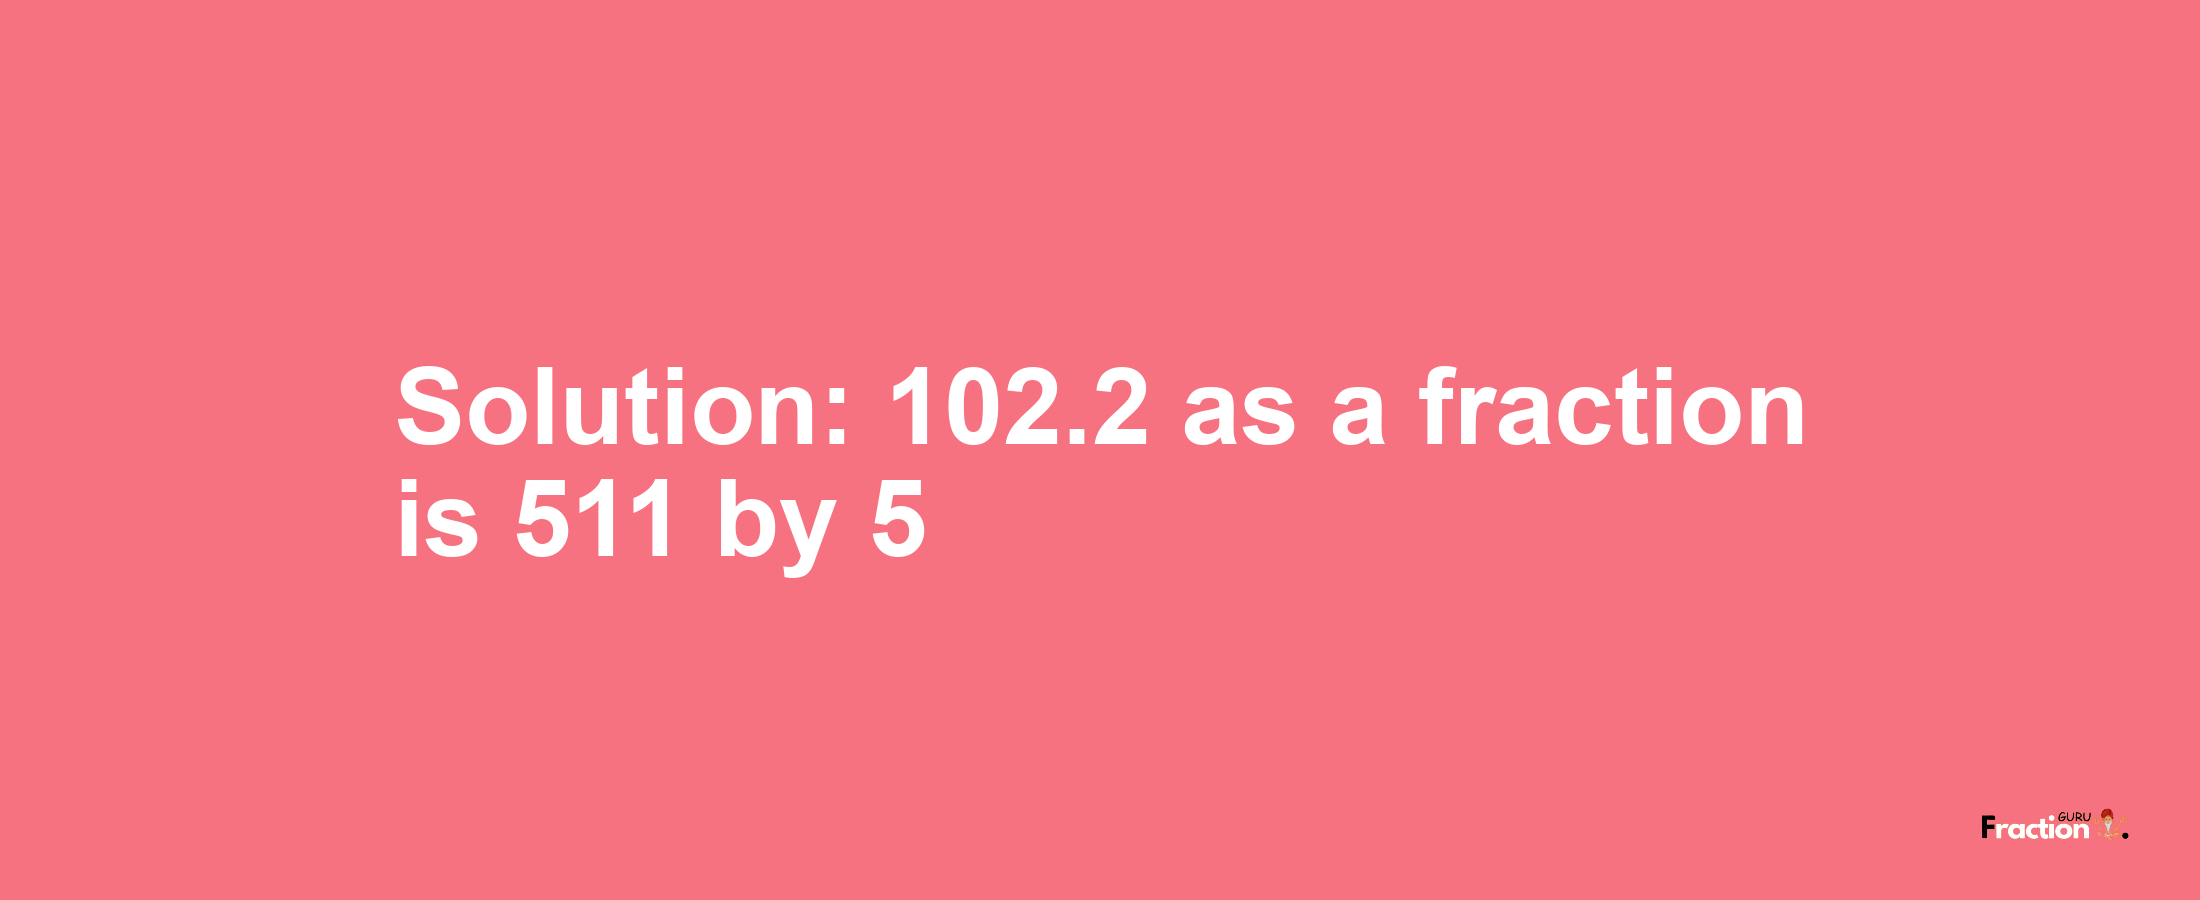 Solution:102.2 as a fraction is 511/5